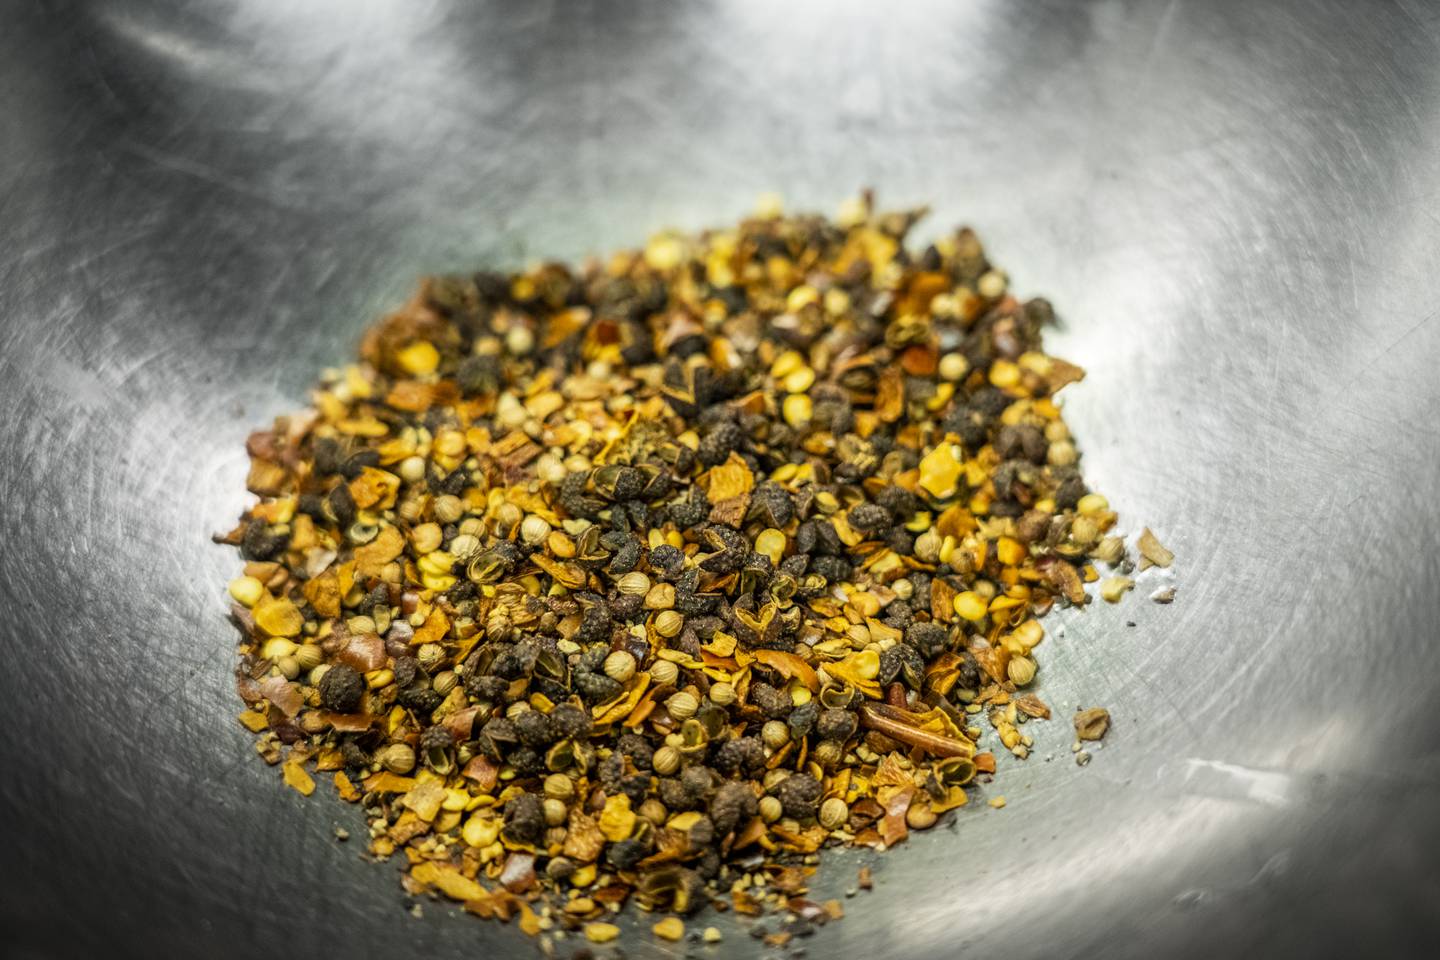 Coriander seeds, szecuhan pepper, chili flakes and black pepper are mixed and crushed.